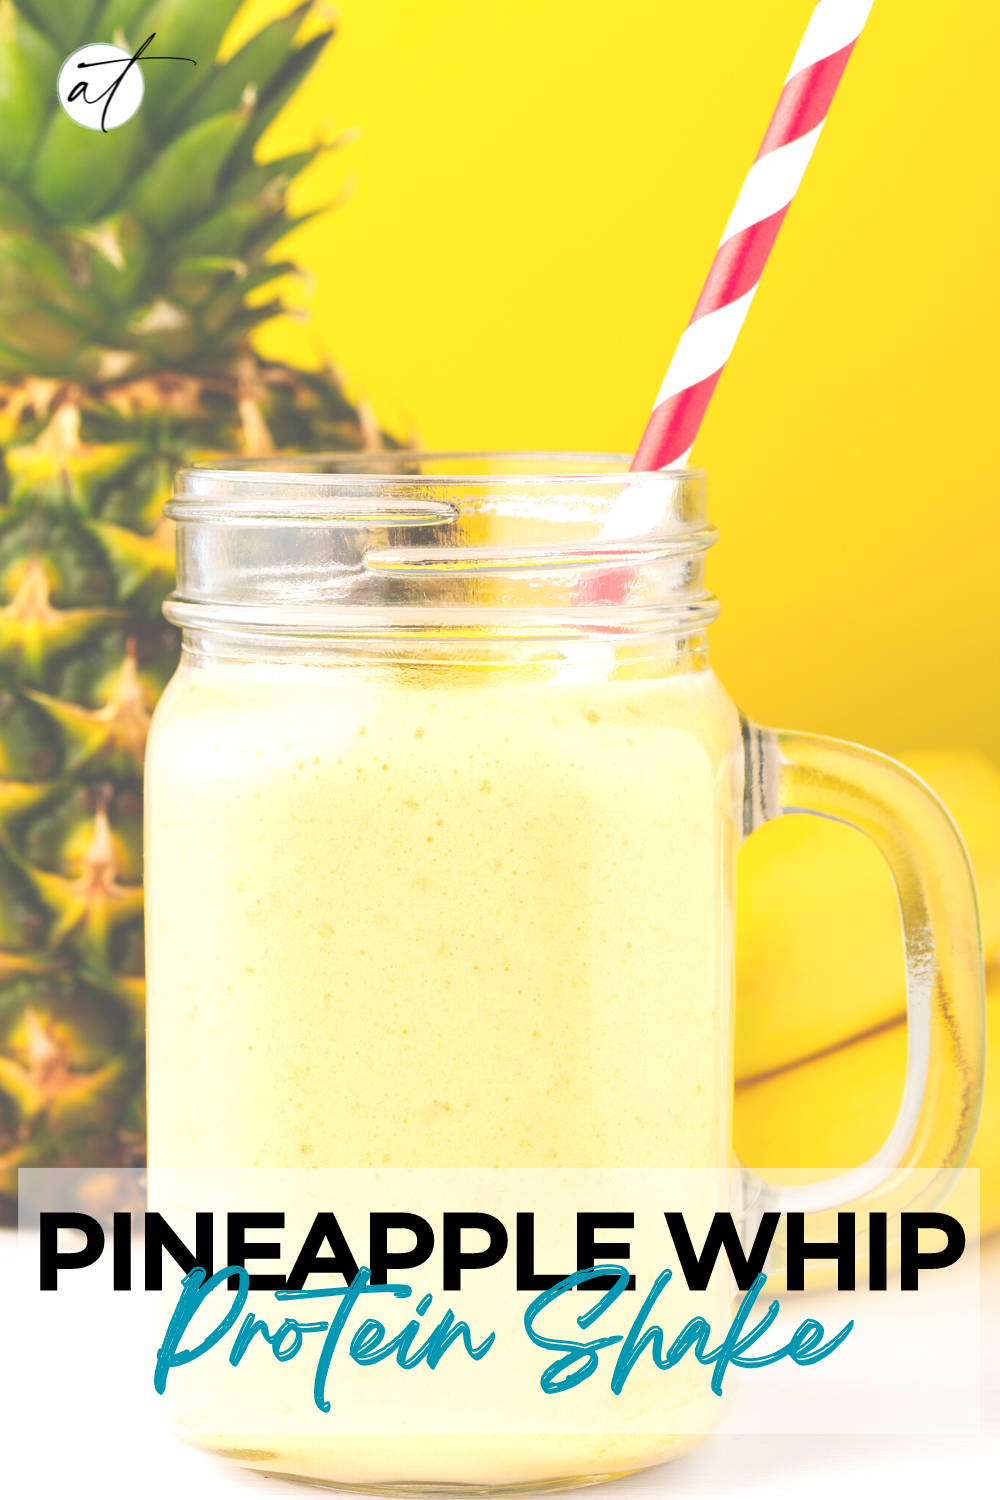 Disney Inspired Dole Whip Protein Shake - Photo of Protein Shake Styled and Ready to Drink. 